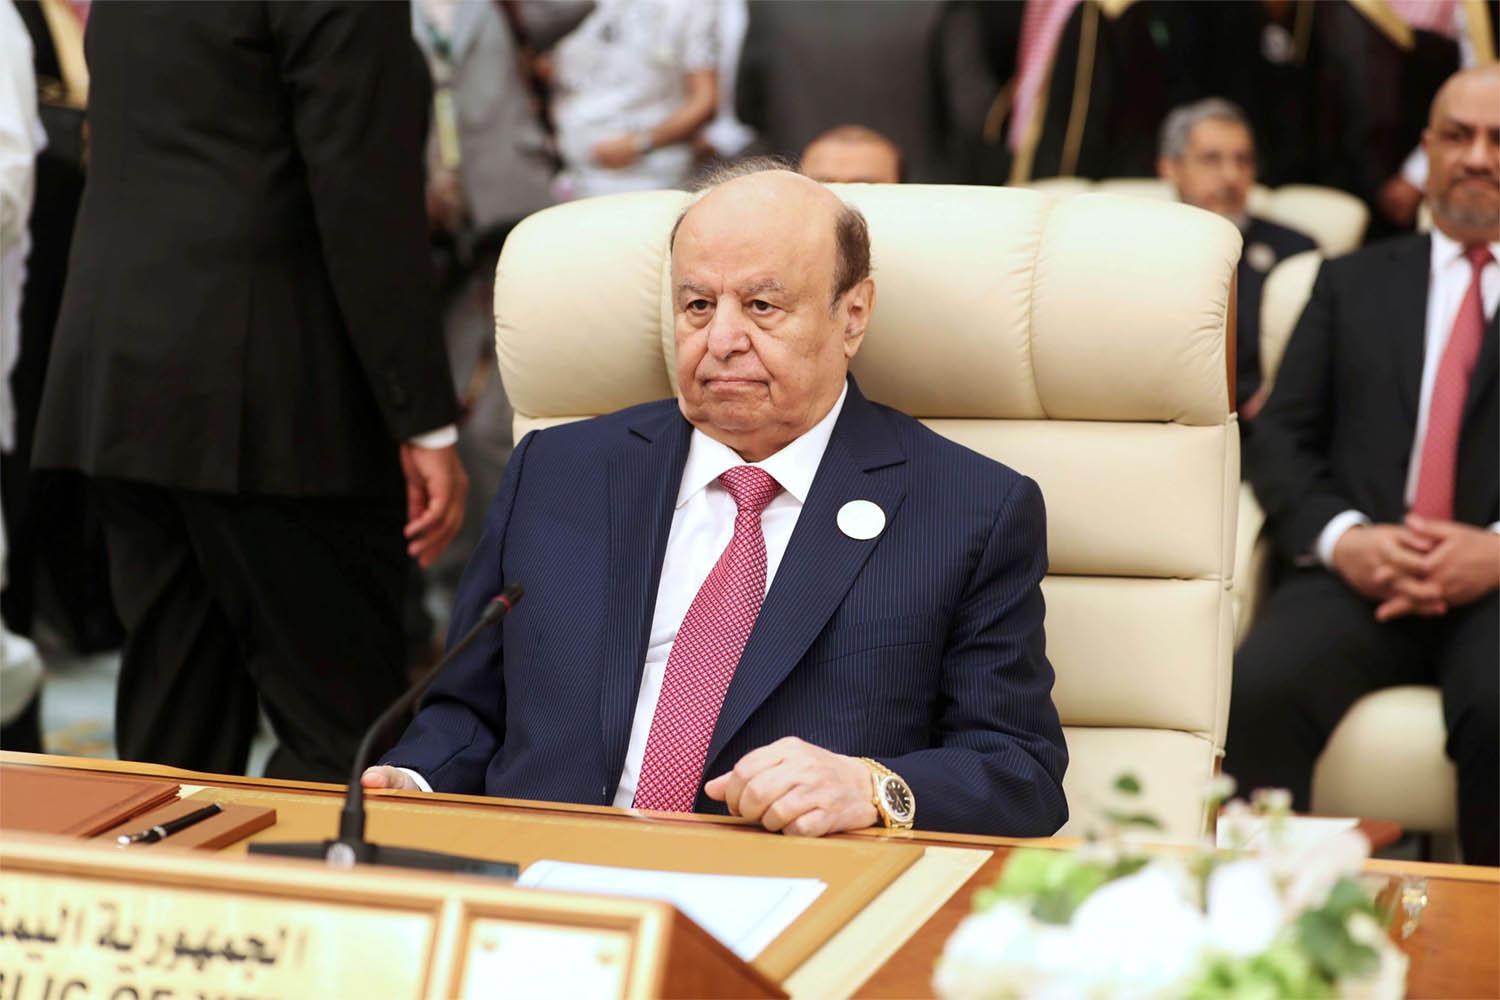 Hadi's move is meant to unify the anti-Houthi camp after years of infighting and disputes